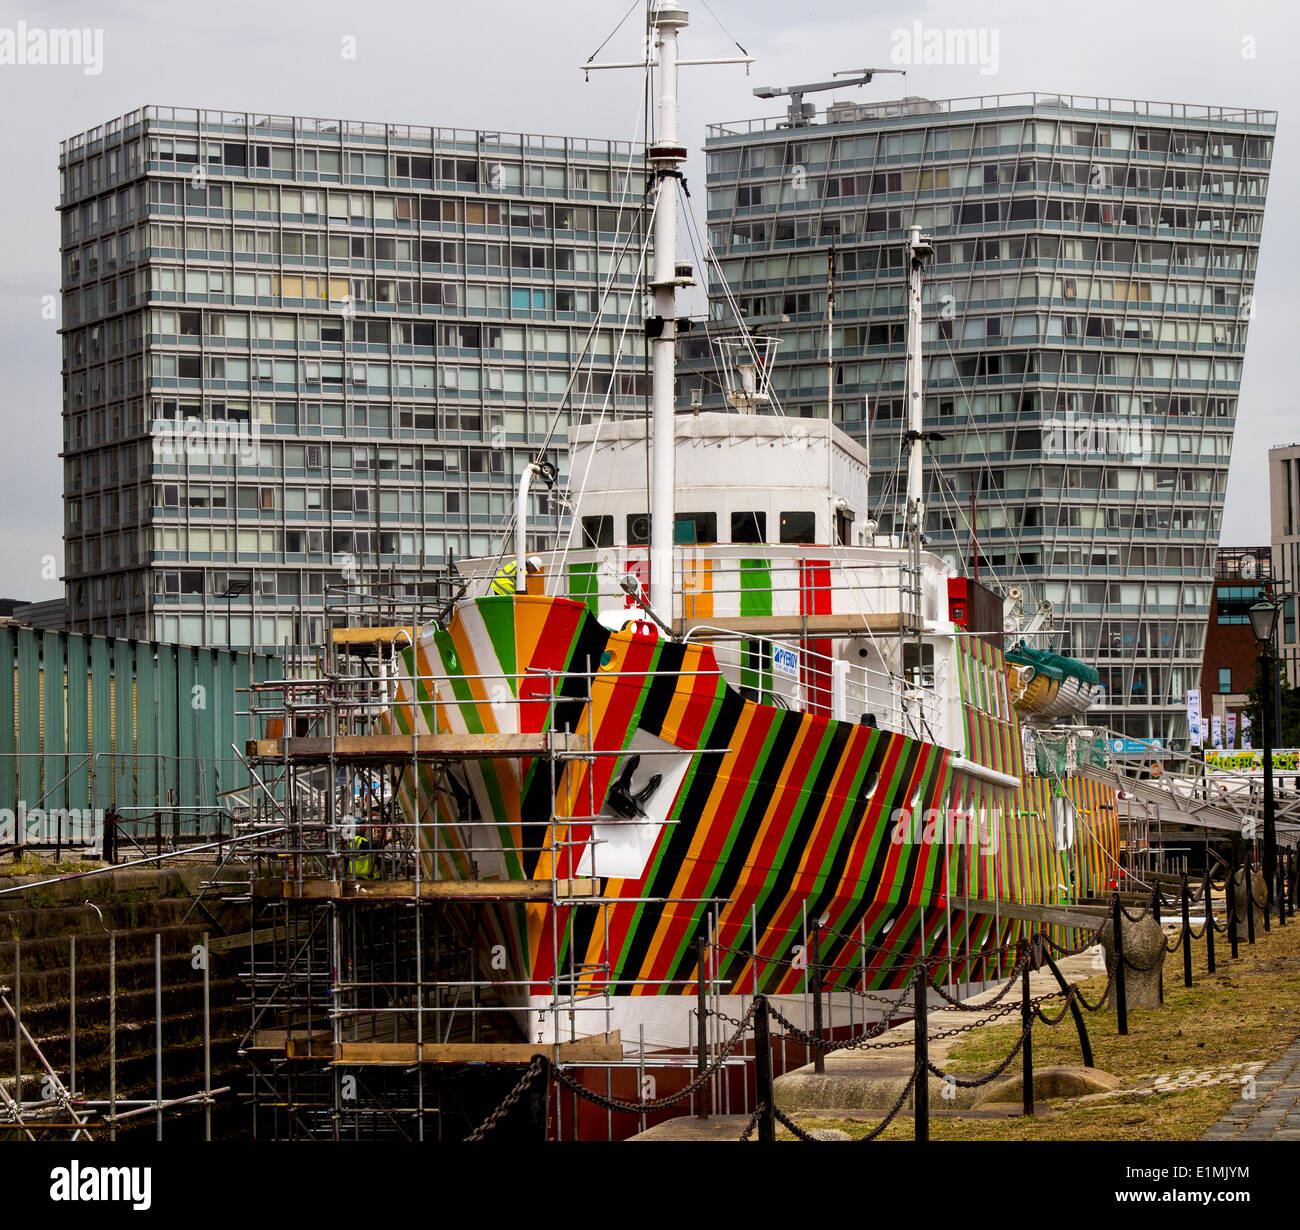 Liverpool pilot cutter number 2, 1953 the Edmund Gardner is being transformed by camouflaged red, black, orange & green stripes,‘razzle dazzle’ painted wartime design. Renowned biennial artist Carlos Cruz-Diez has been commissioned to work with  “dazzle” camouflage using an historic pilot ship owned and conserved by Merseyside Maritime Museum. The ship, which is situated in dry dock adjacent to Liverpool’s Albert Dock is being painted by the Cammell Laird team to realise the wartime design. Stock Photo